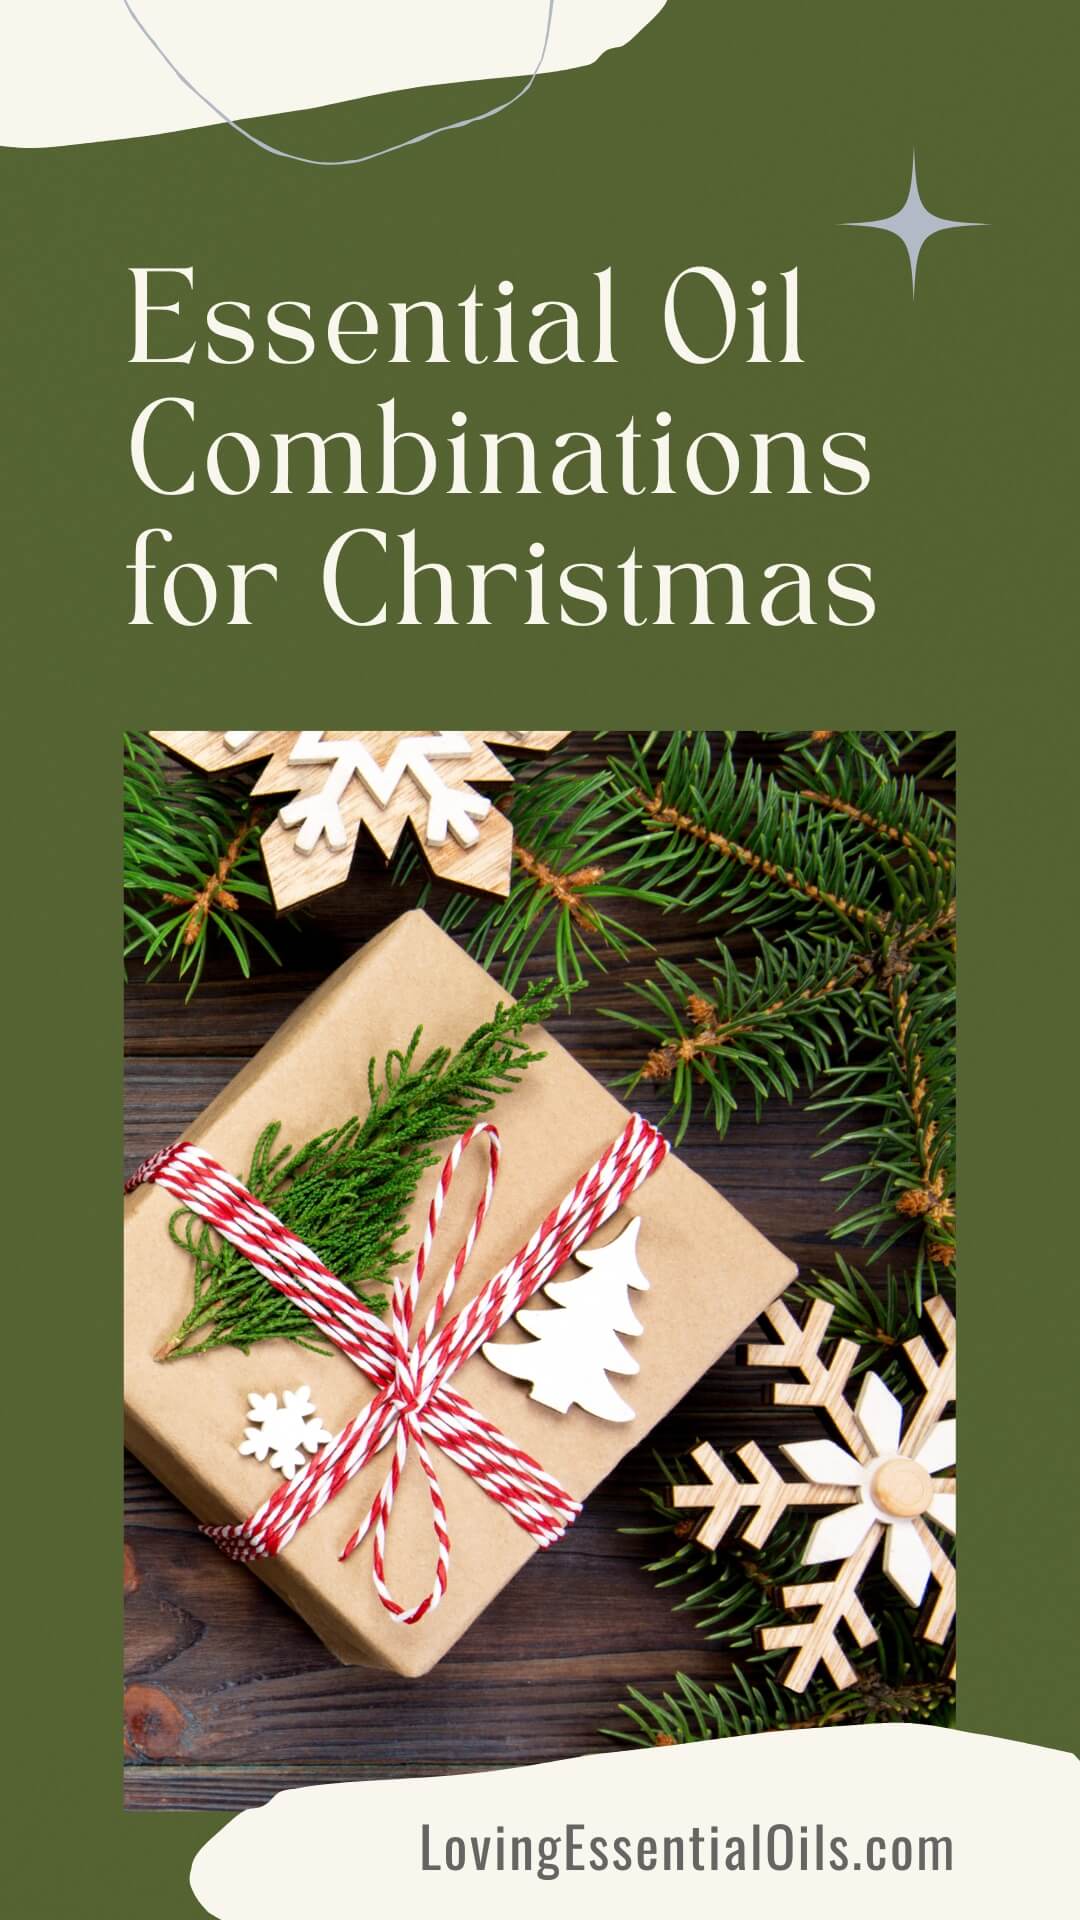 Christmas Essential Oil Combinations by Loving Essential Oils